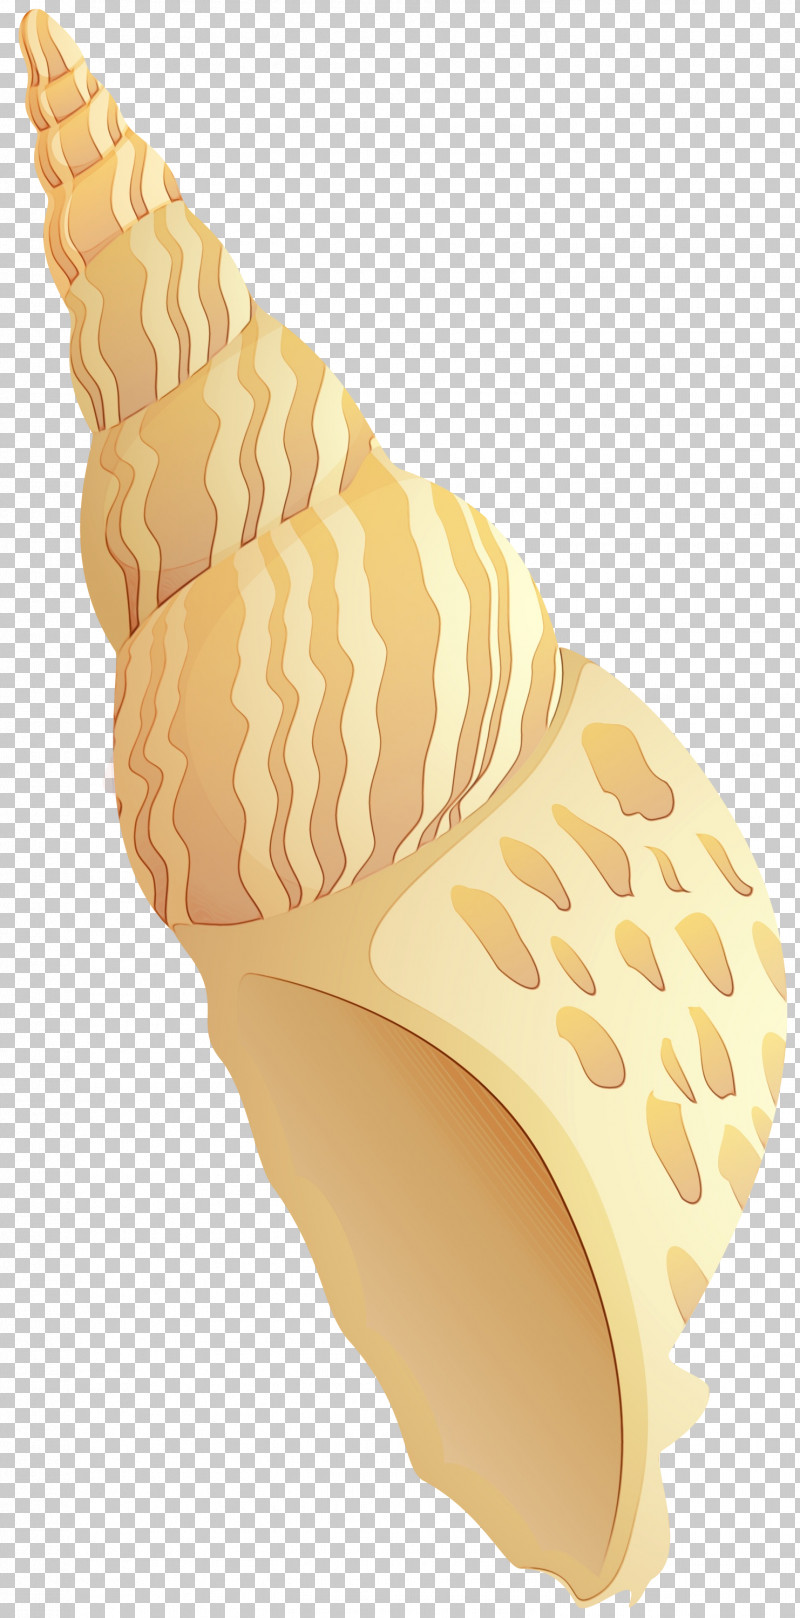 Ice Cream PNG, Clipart, Commodity, Cone, Geometry, Ice Cream, Ice Cream Cone Free PNG Download